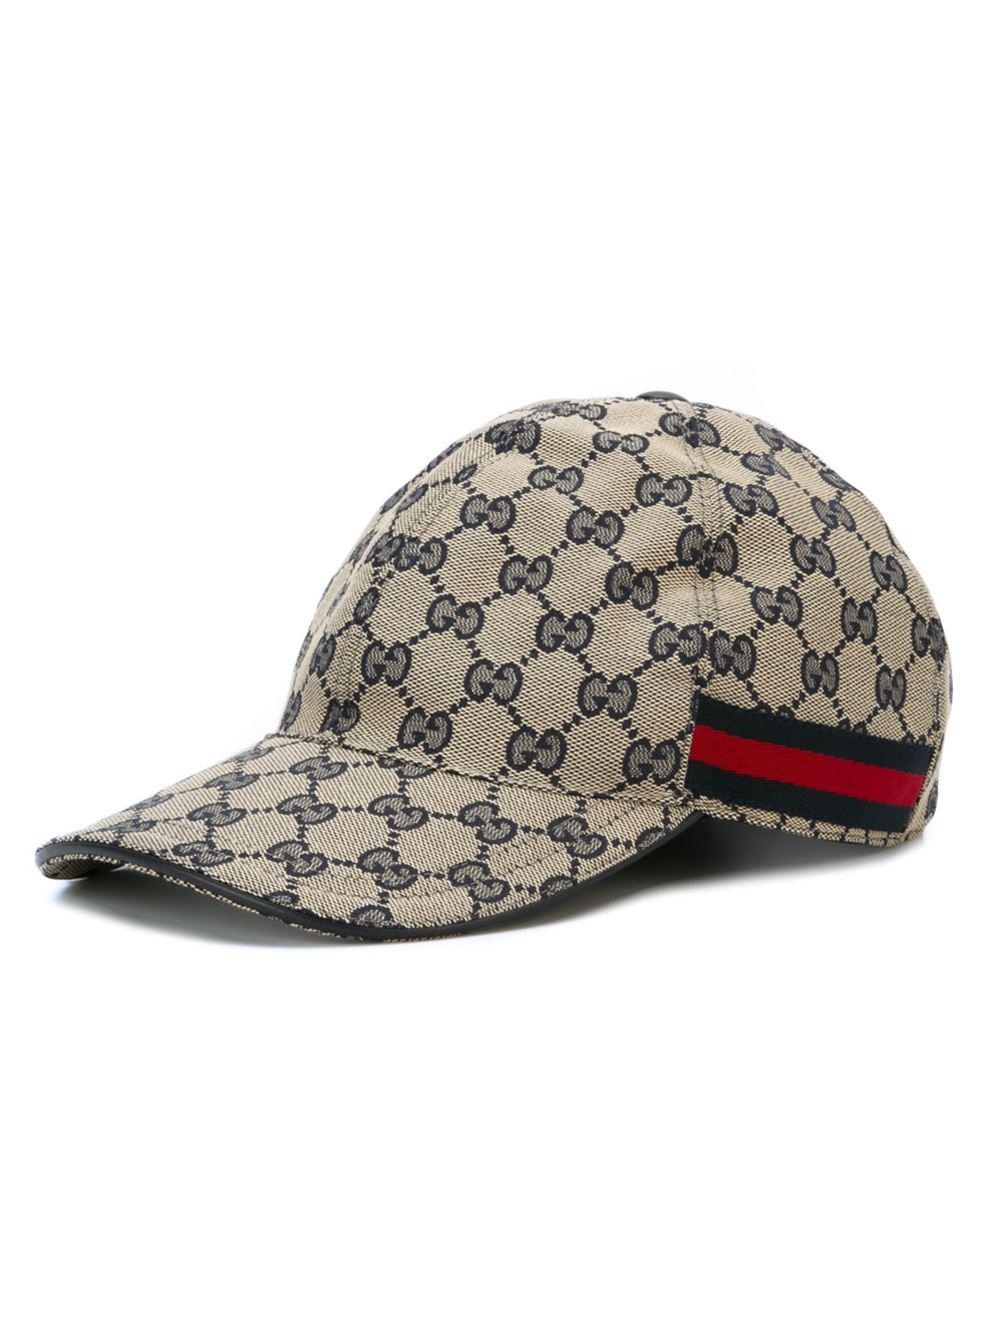 Gucci Canvas Gg' Baseball Cap With Web in Grey (Gray) for Men - Lyst